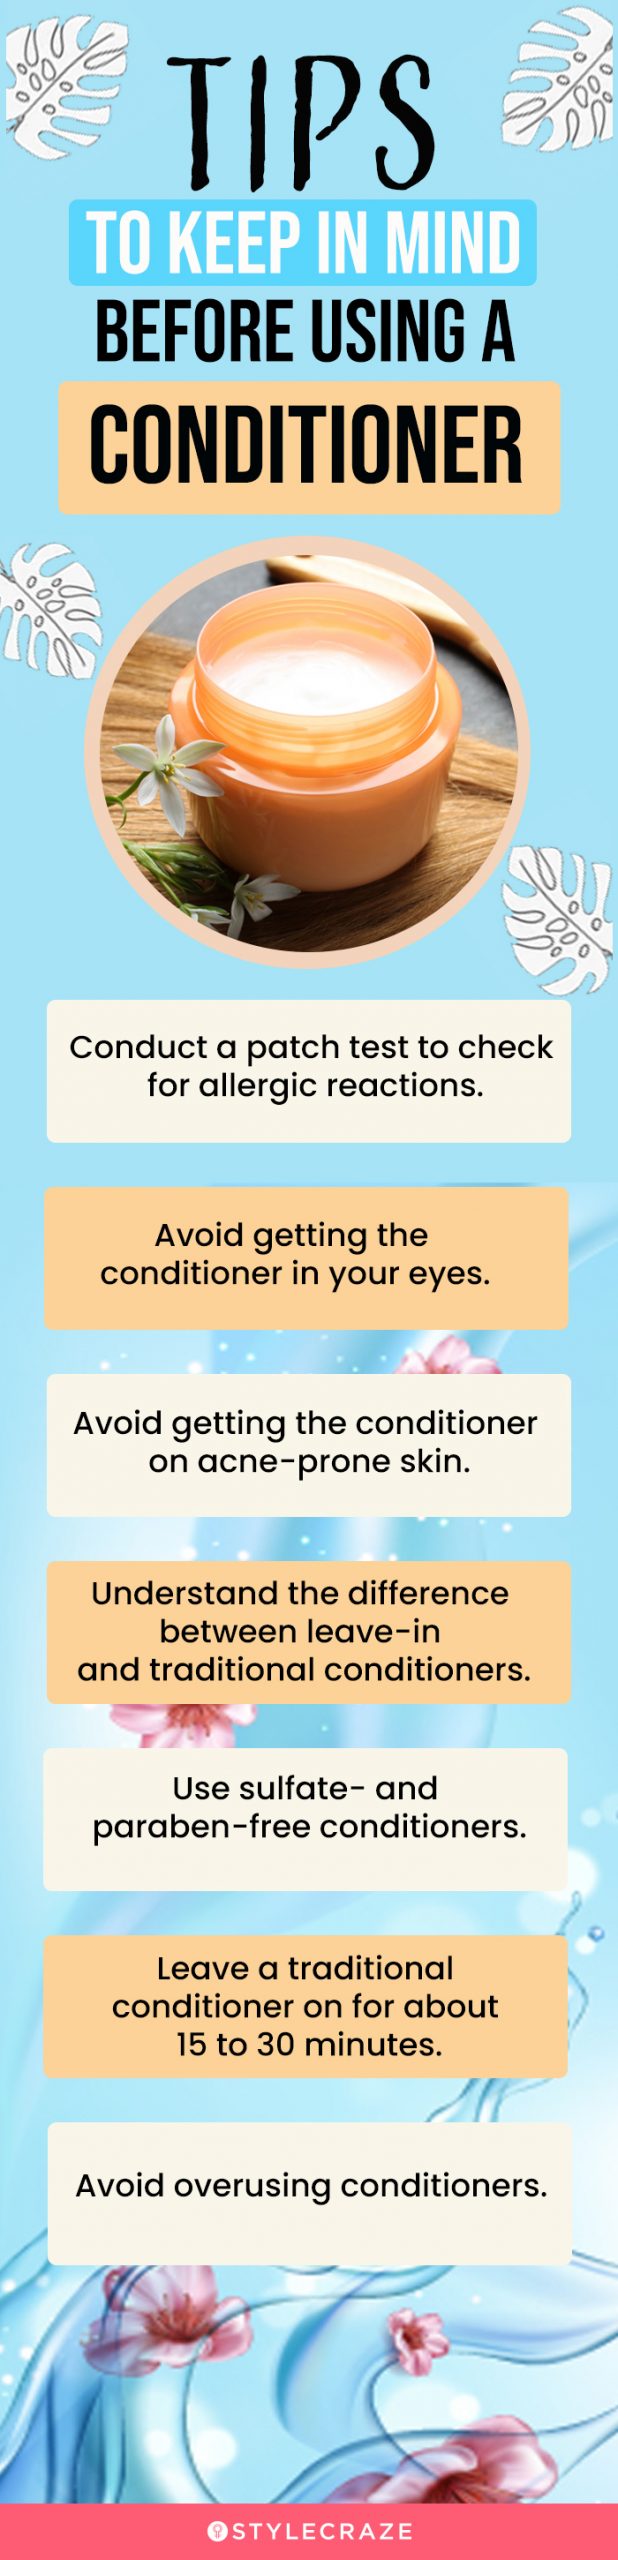 tips to keep in mind before using a conditioner (infographic)